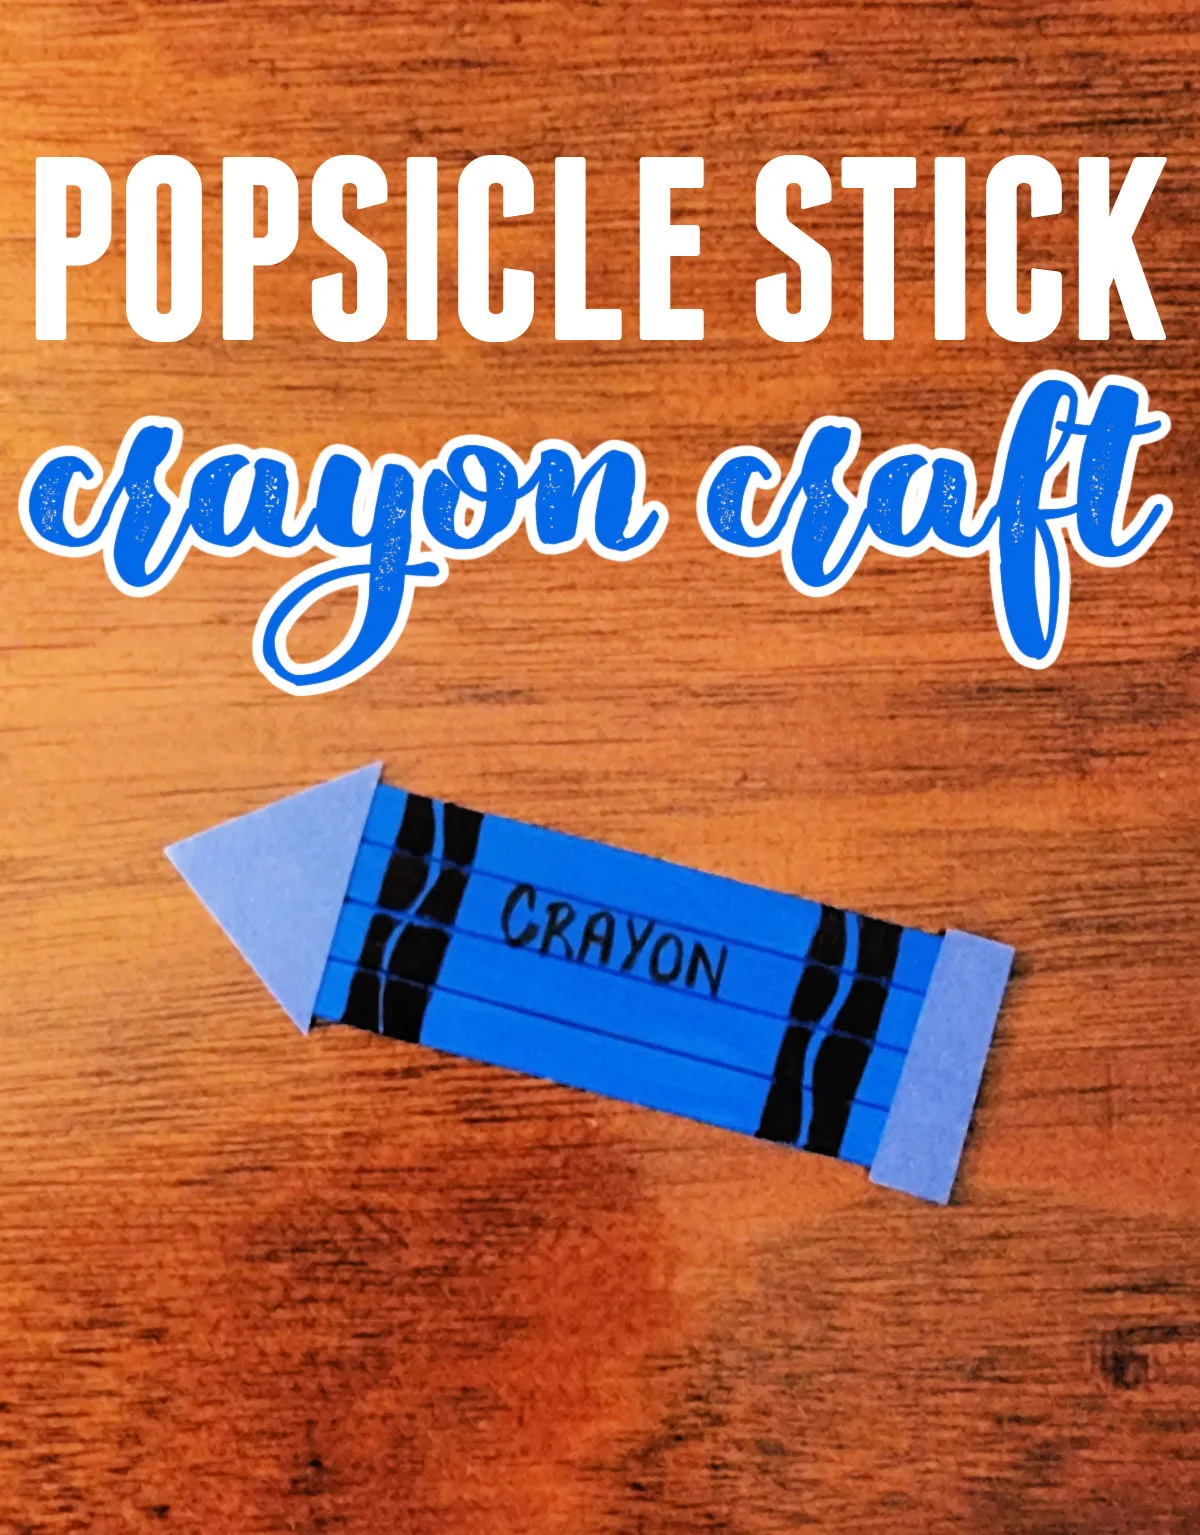 Popsicle Stick Crayon craft on a wooden background